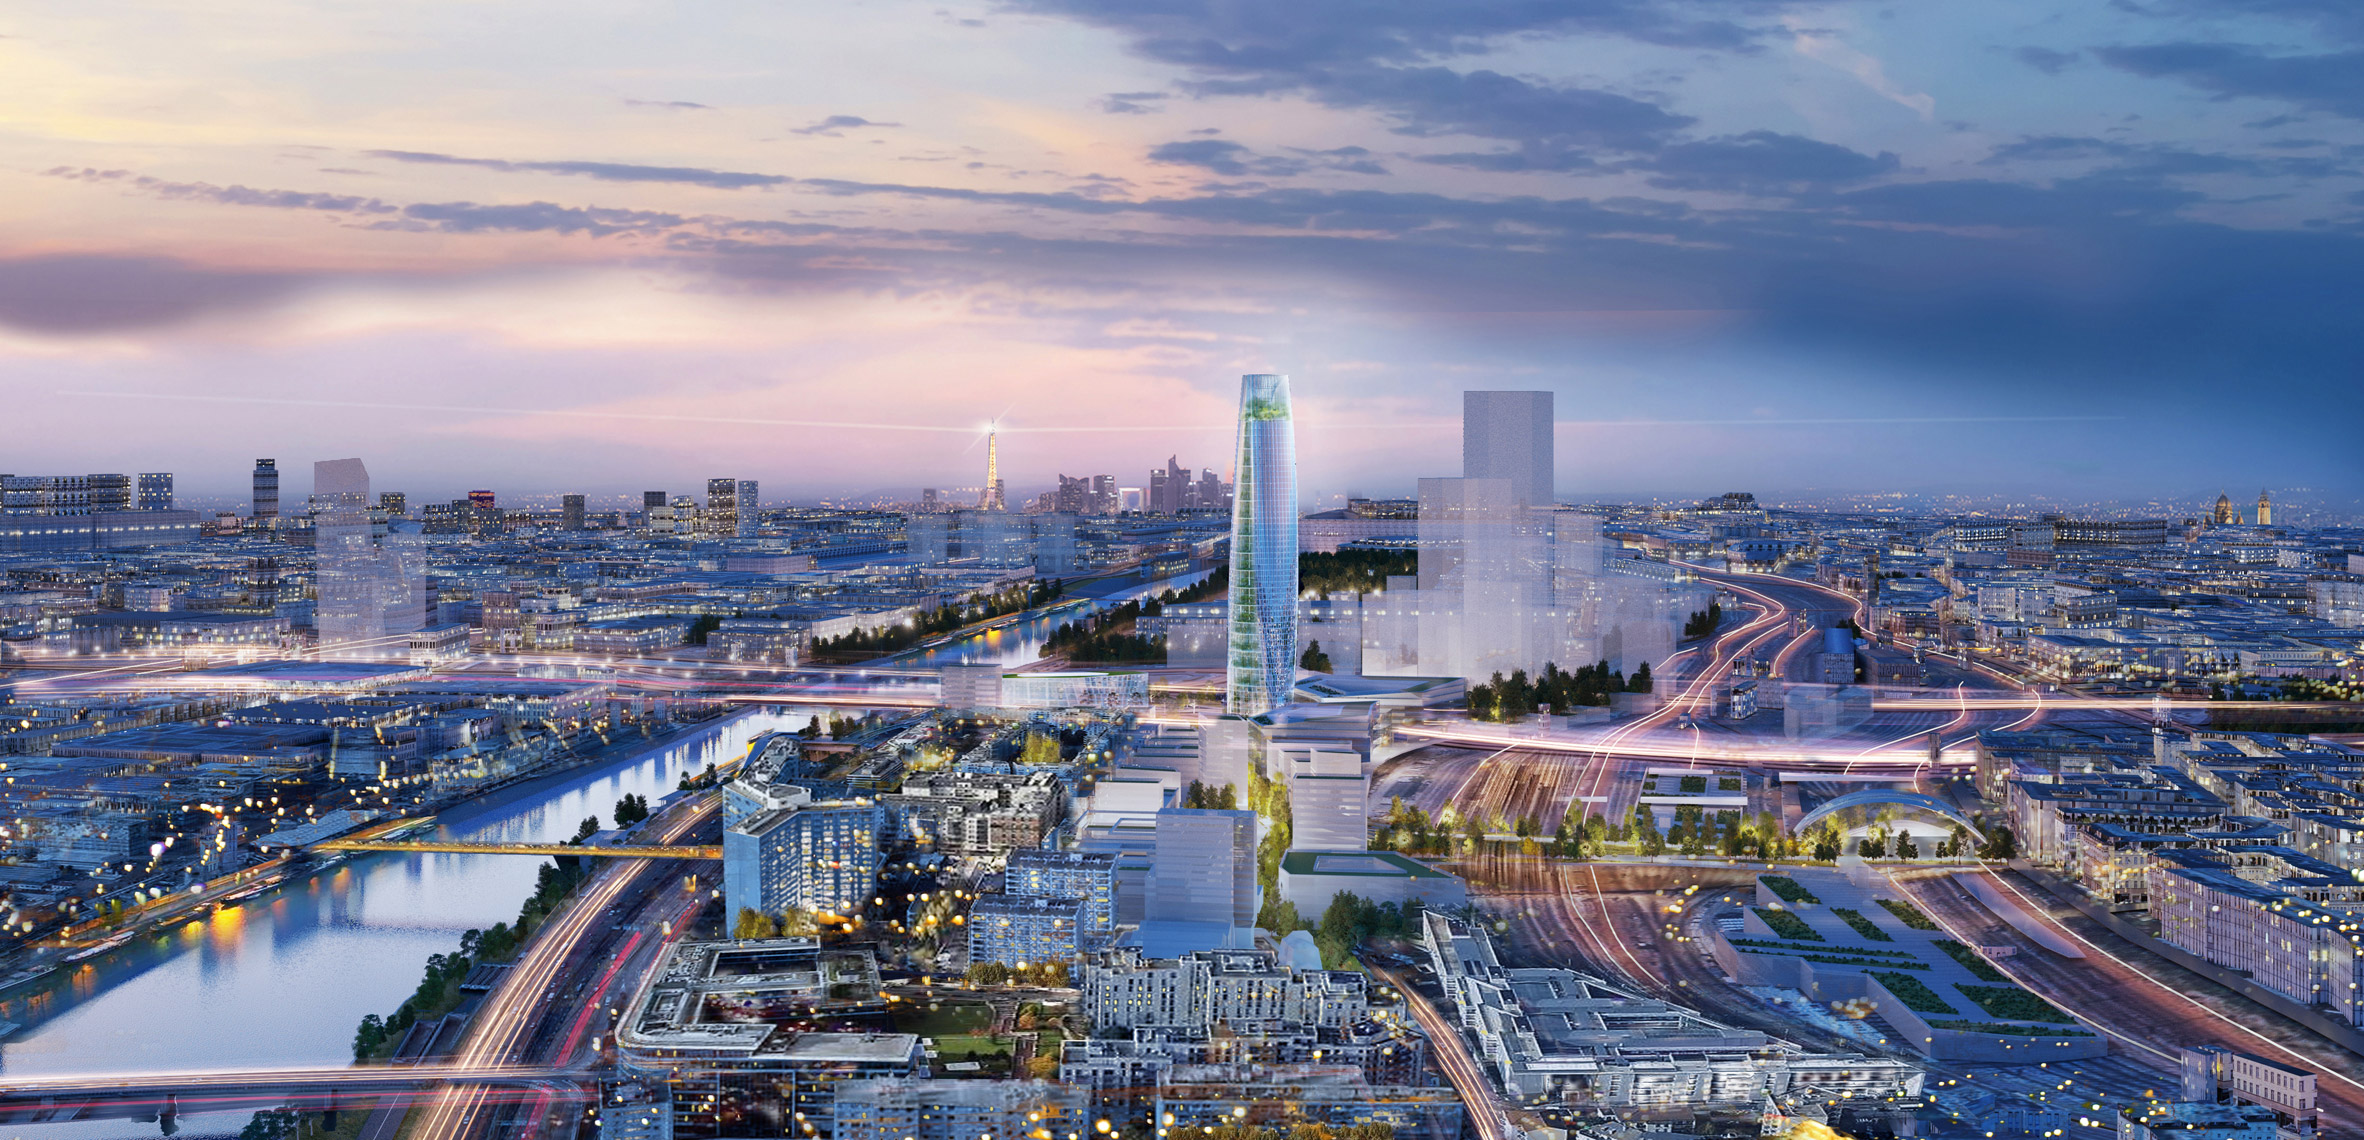 Paris garden skyscraper by SOM will be "one of the most sustainable buildings in Europe?